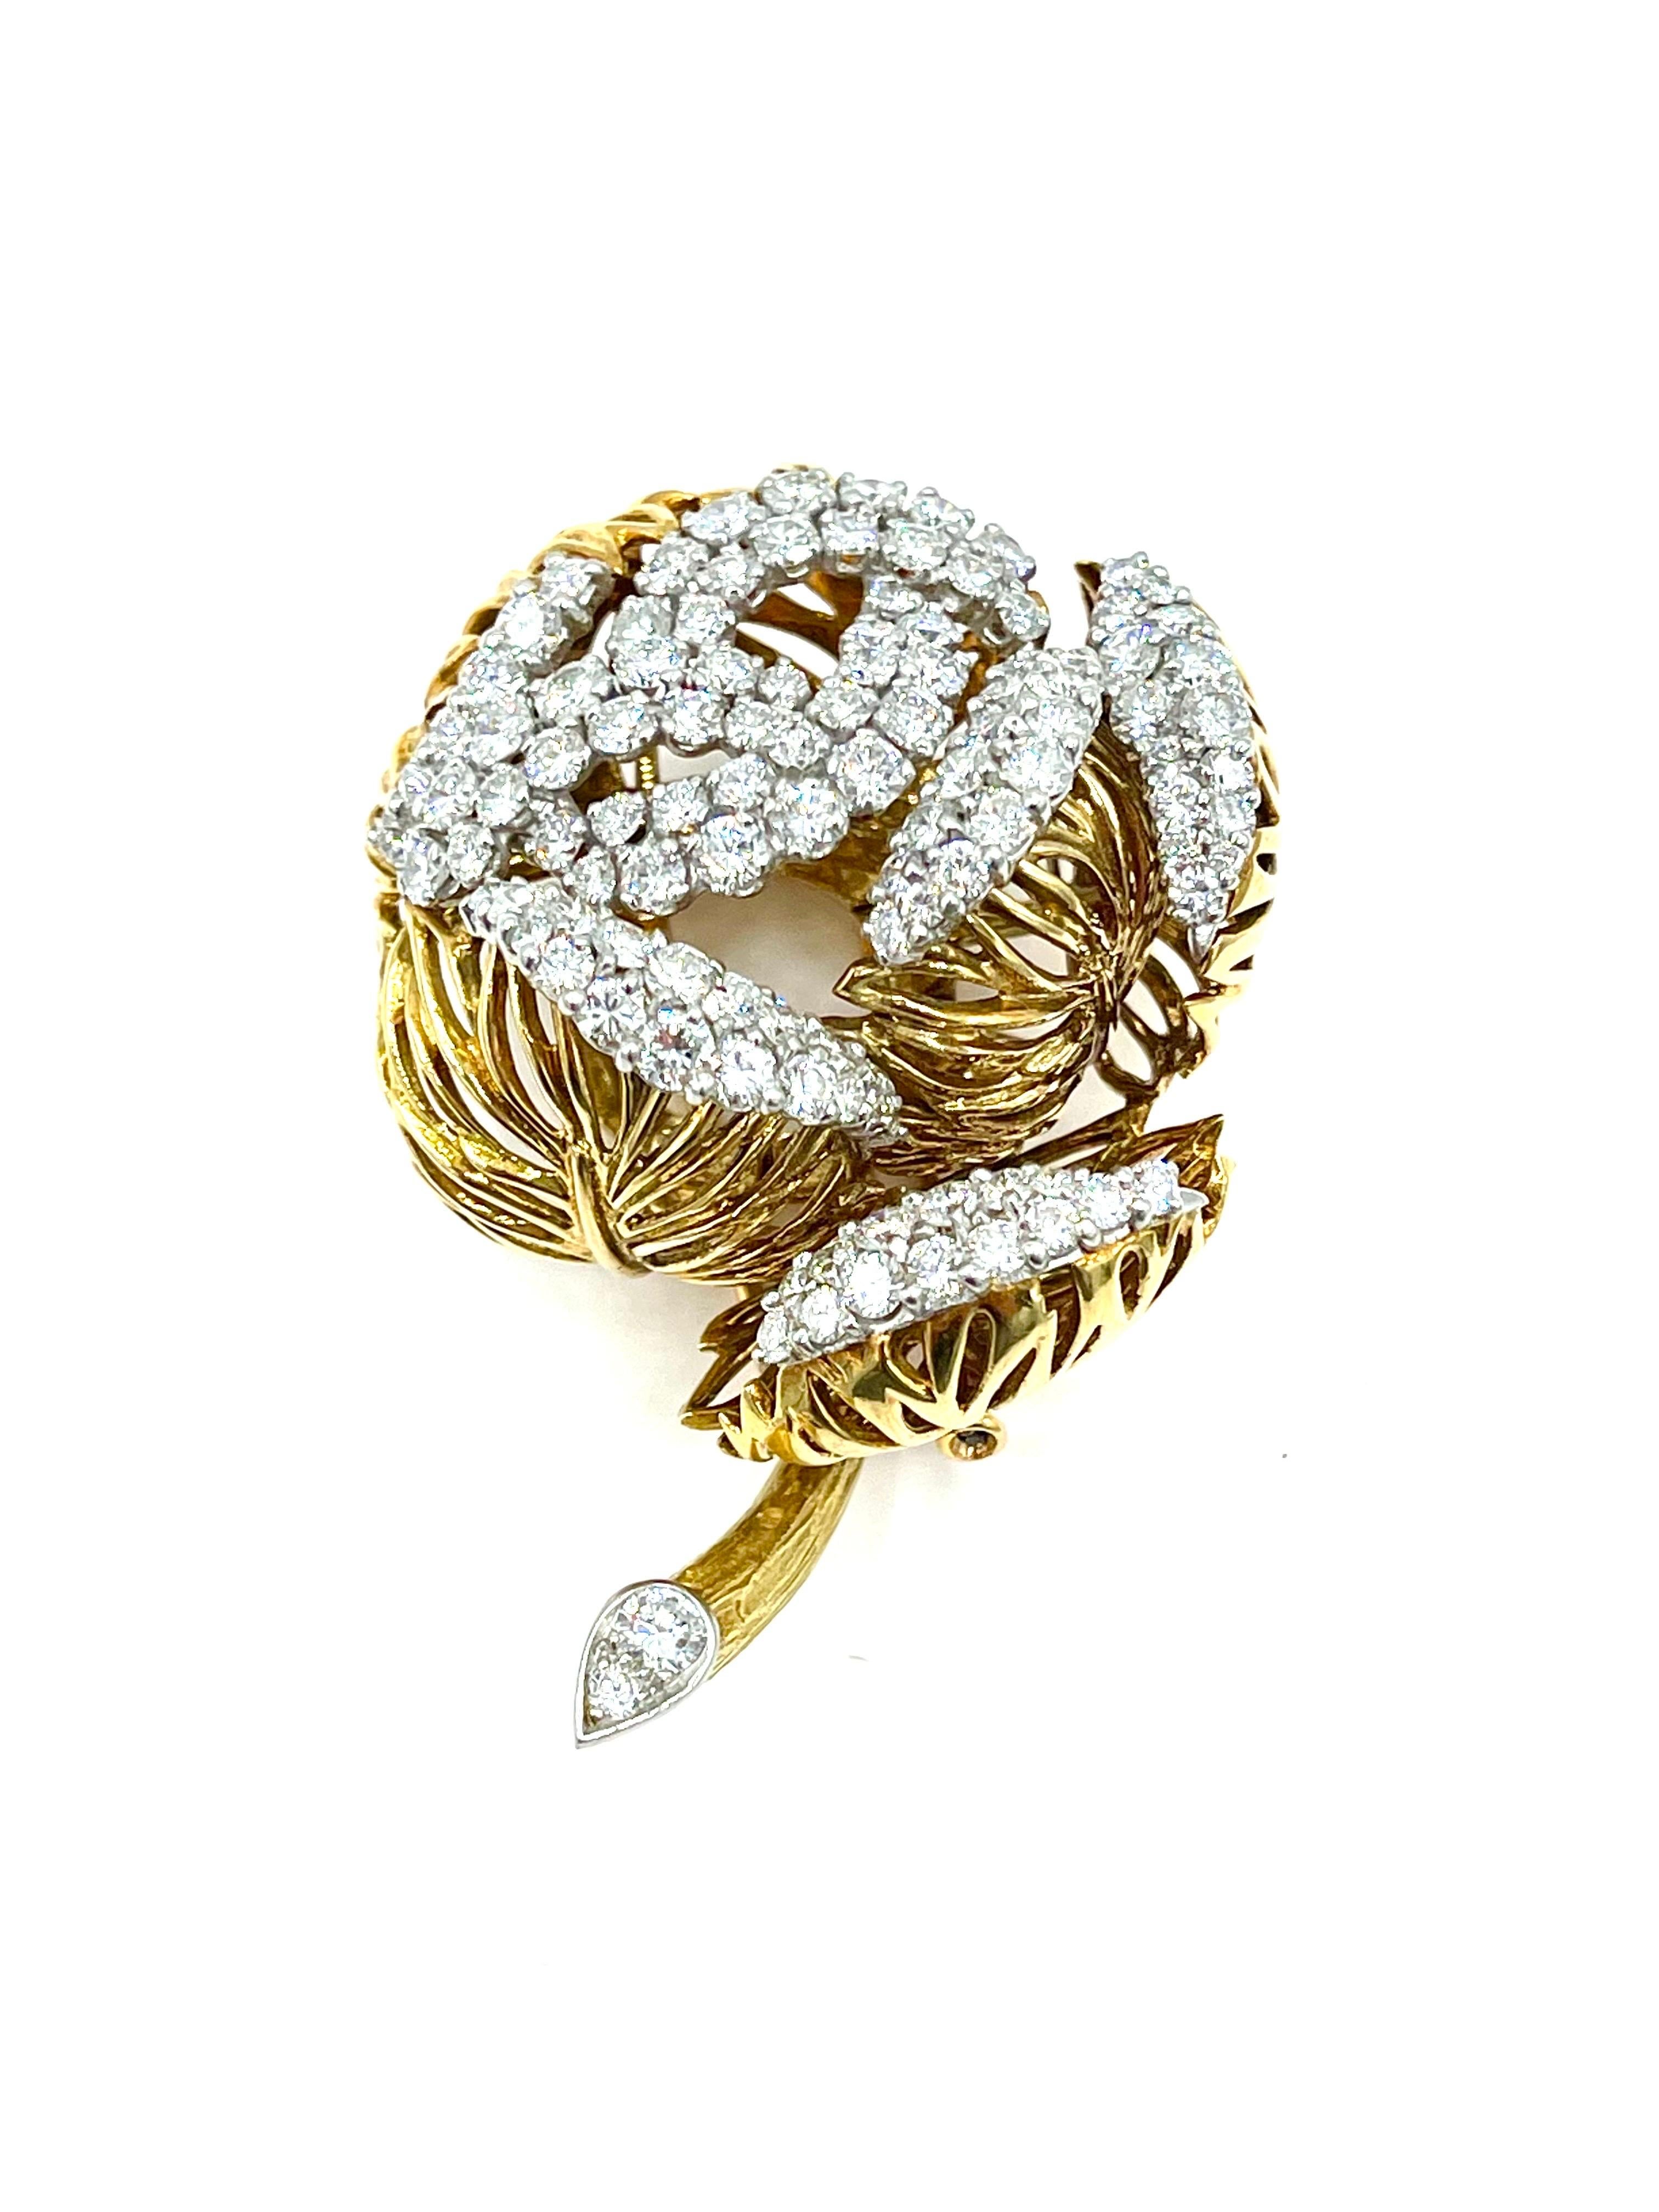 Retro 8.05 Carat Round Brilliant Diamond French Made Flower Brooch For Sale